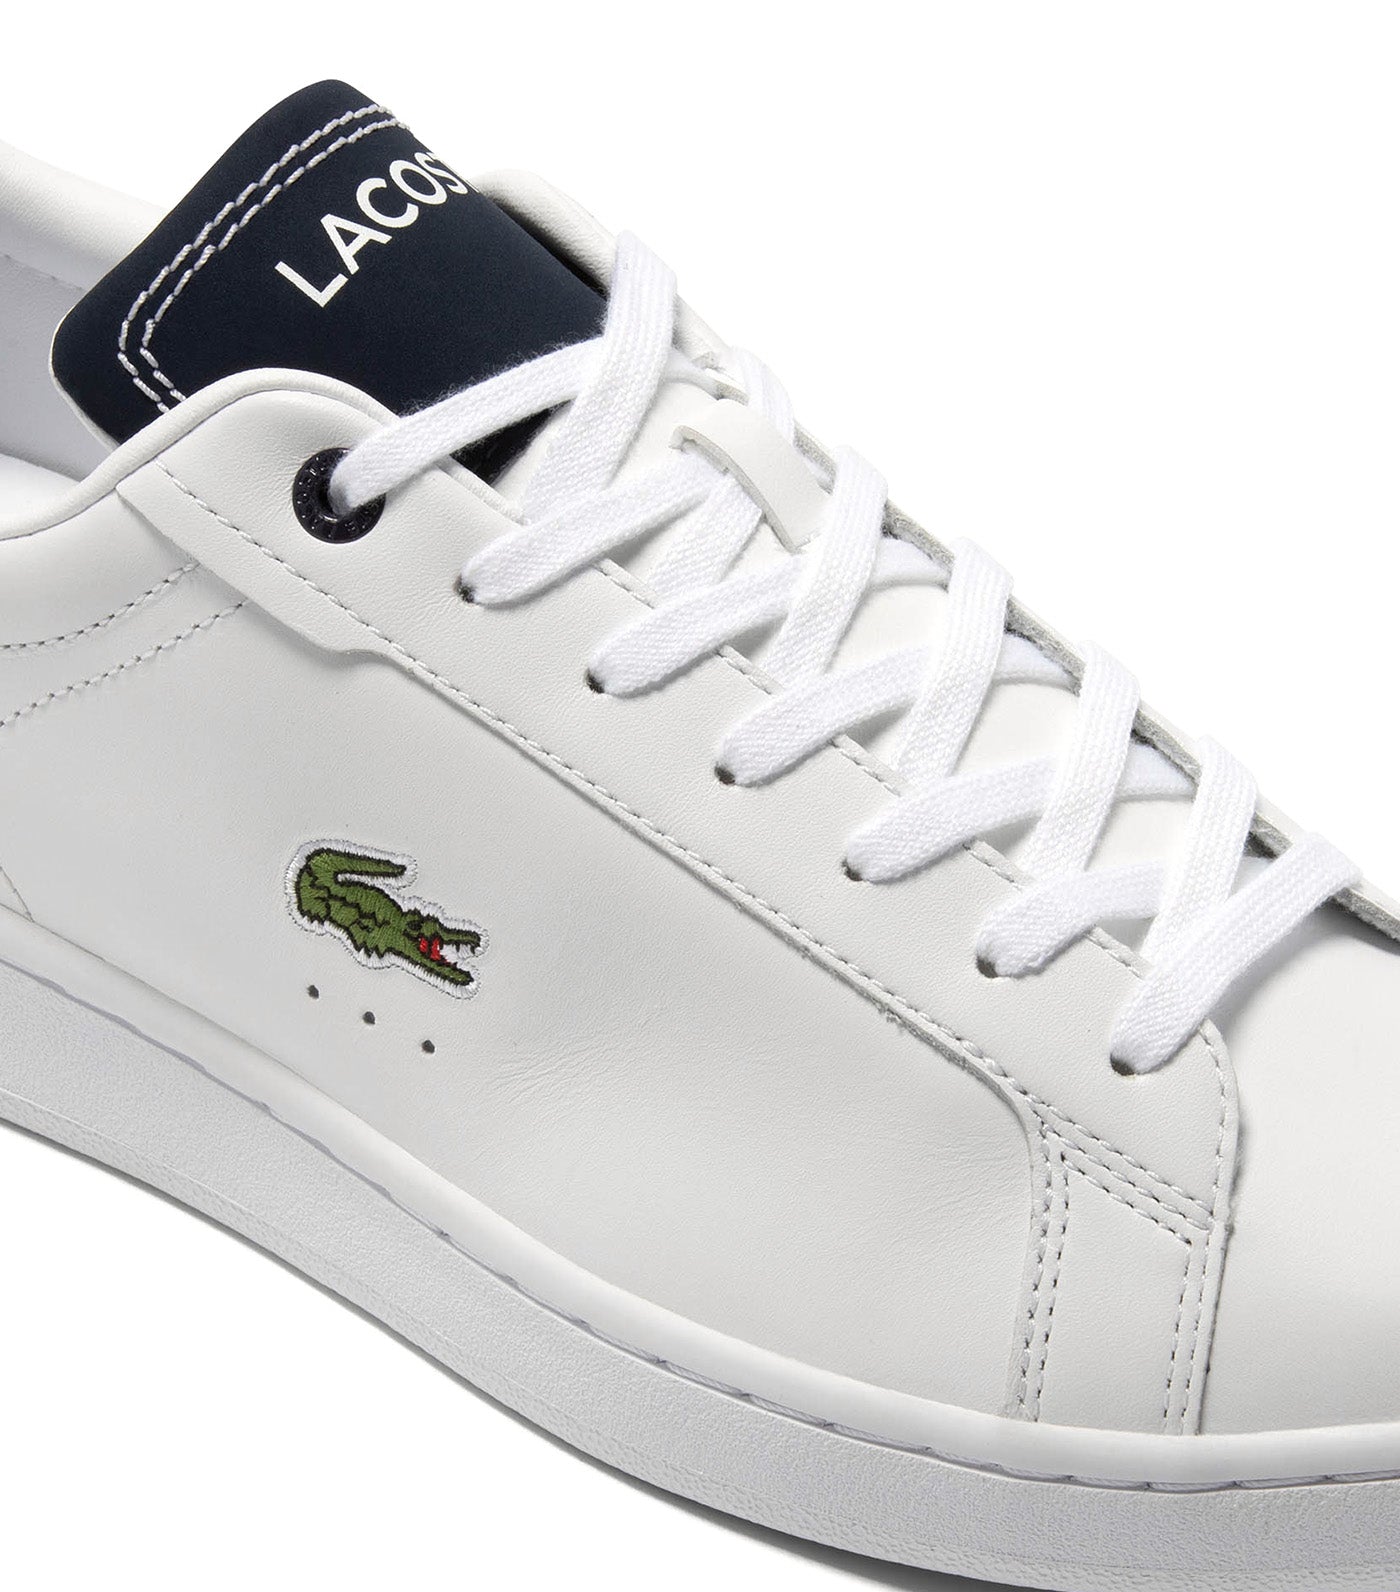 Men's Contrast Leather Carnaby Pro Trainers White Navy